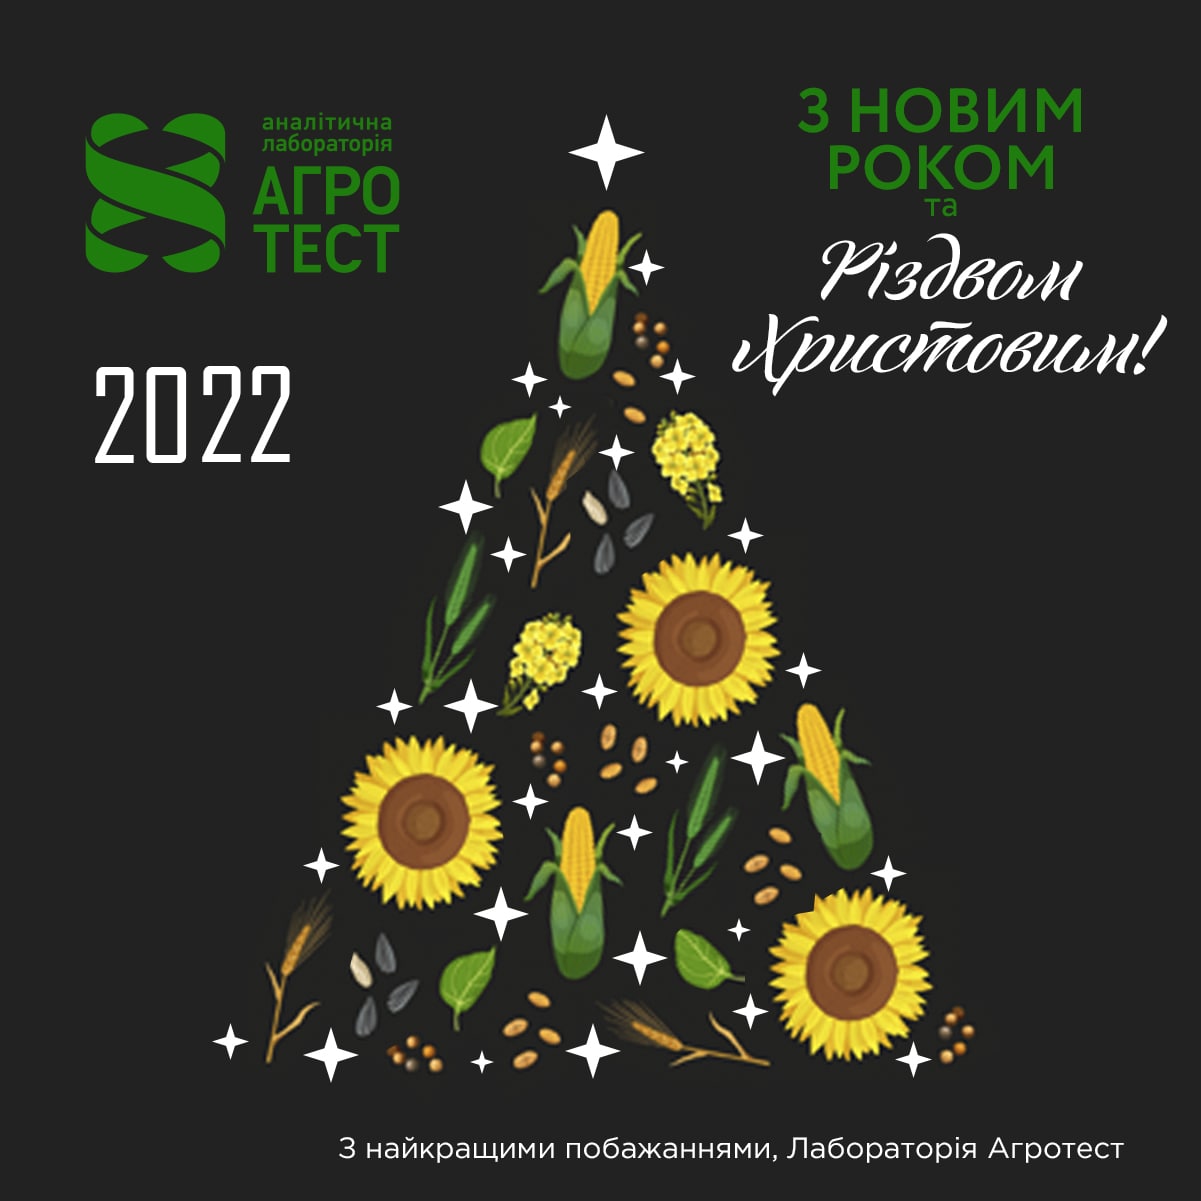 The agrotest laboratory team congratulates you on the new year and christmas!